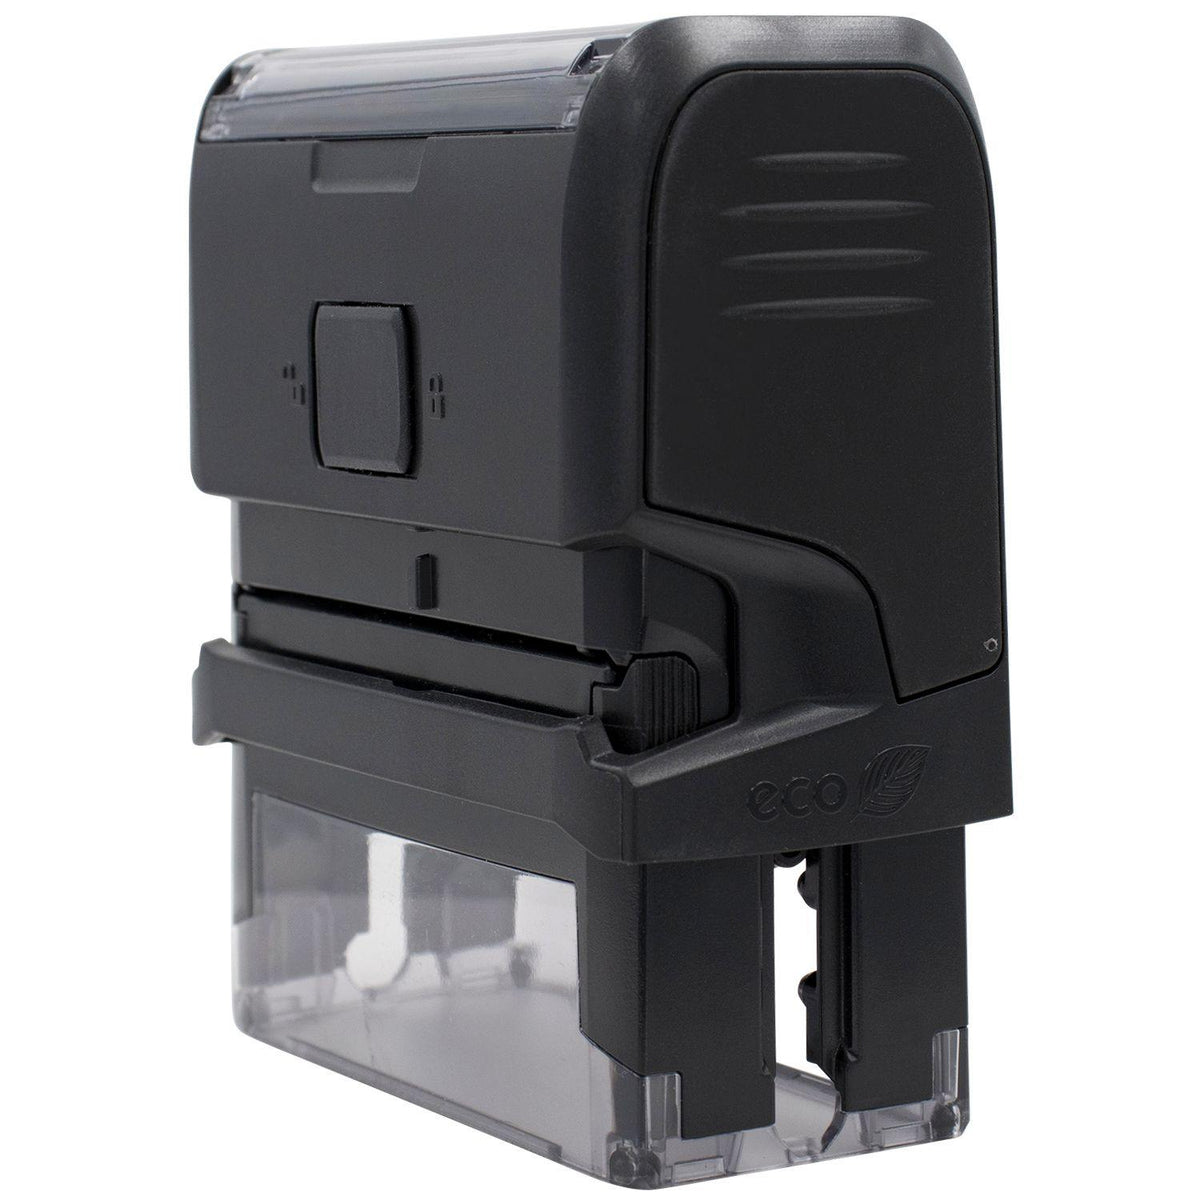 Large Self Inking Please Finish Stamp - Engineer Seal Stamps - Brand_Trodat, Impression Size_Large, Stamp Type_Self-Inking Stamp, Type of Use_Teacher